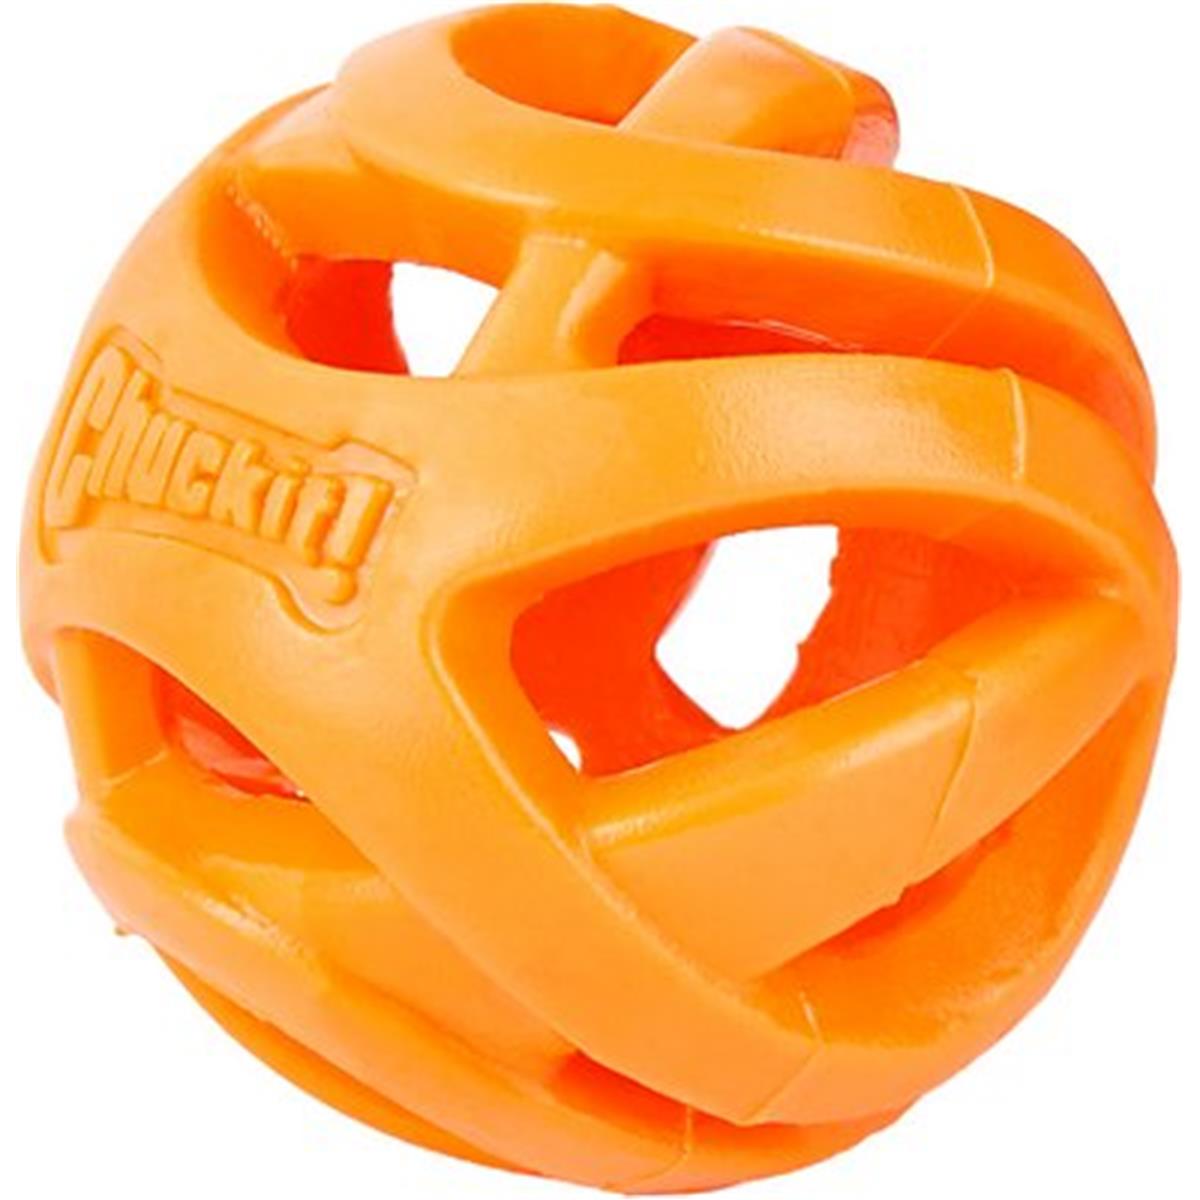 Do32216 Chuckit Breathe Right Fetch Ball, Extra Large